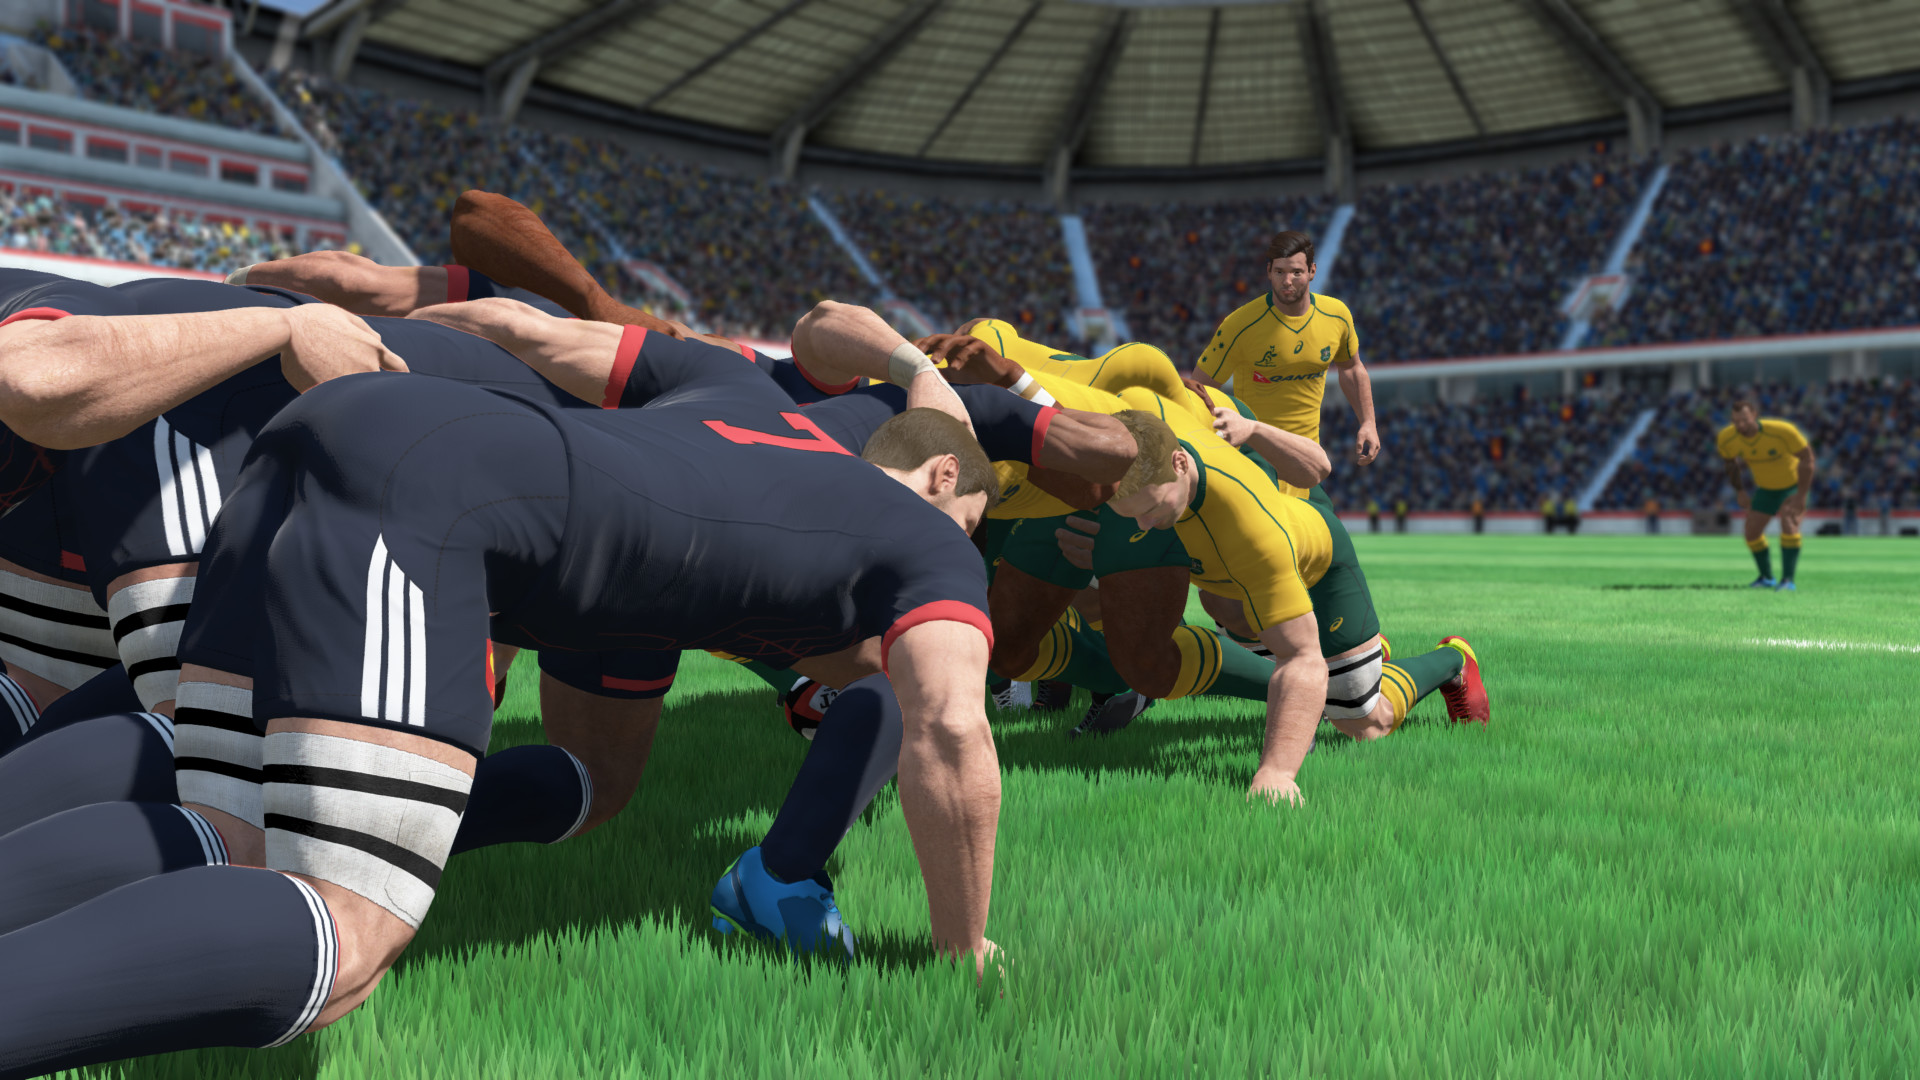 RUGBY 18 on Steam